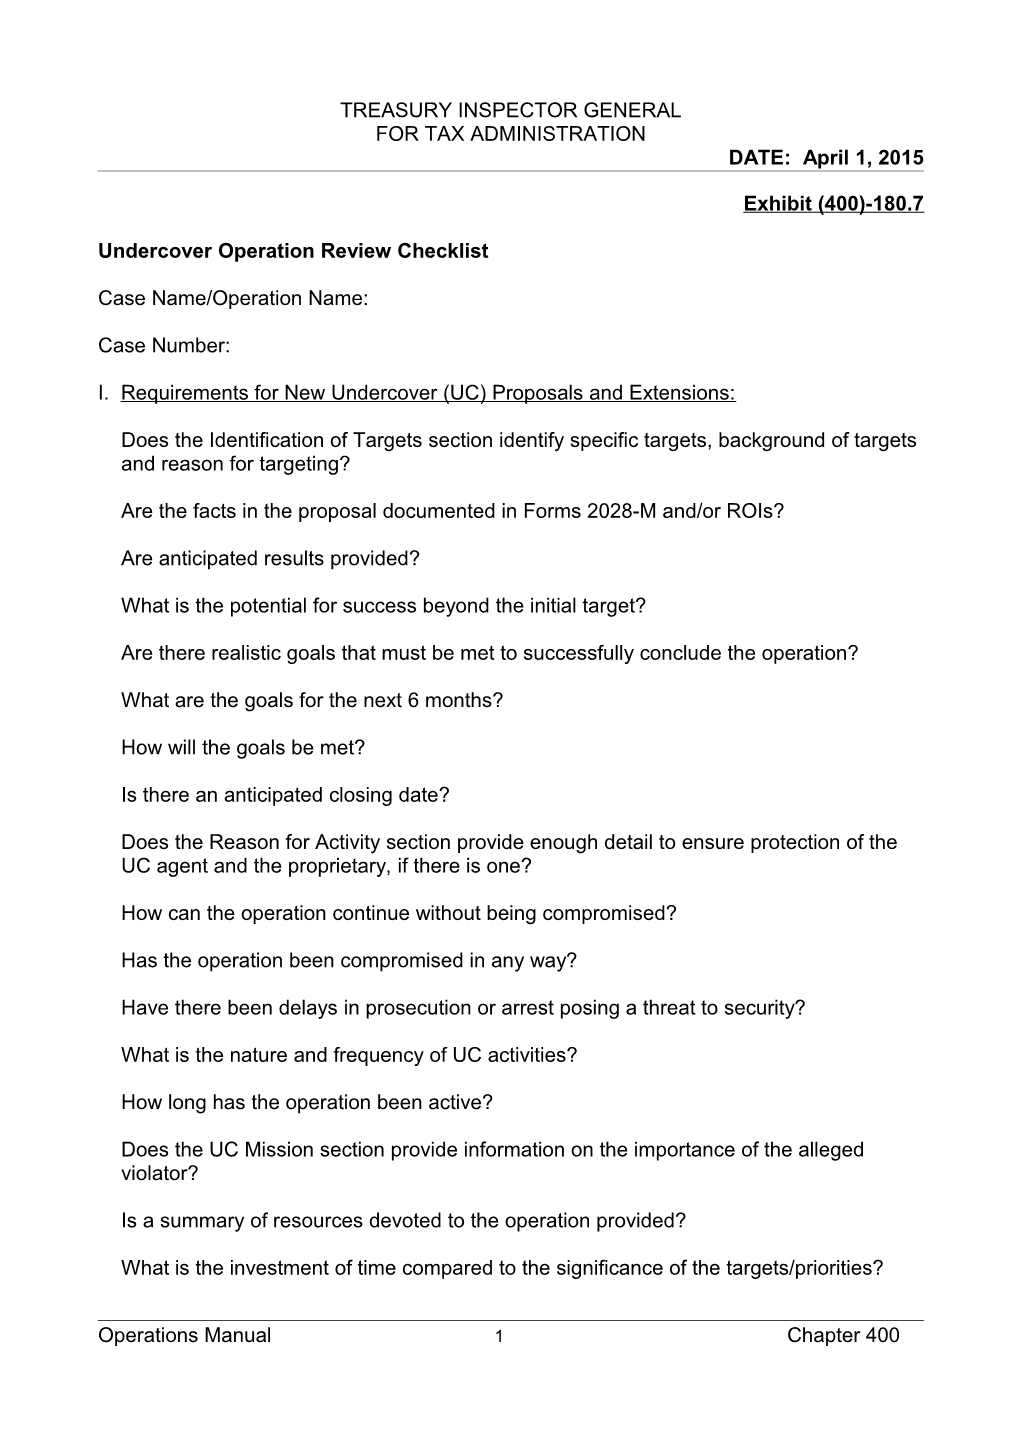 Undercover Operation Review Checklist